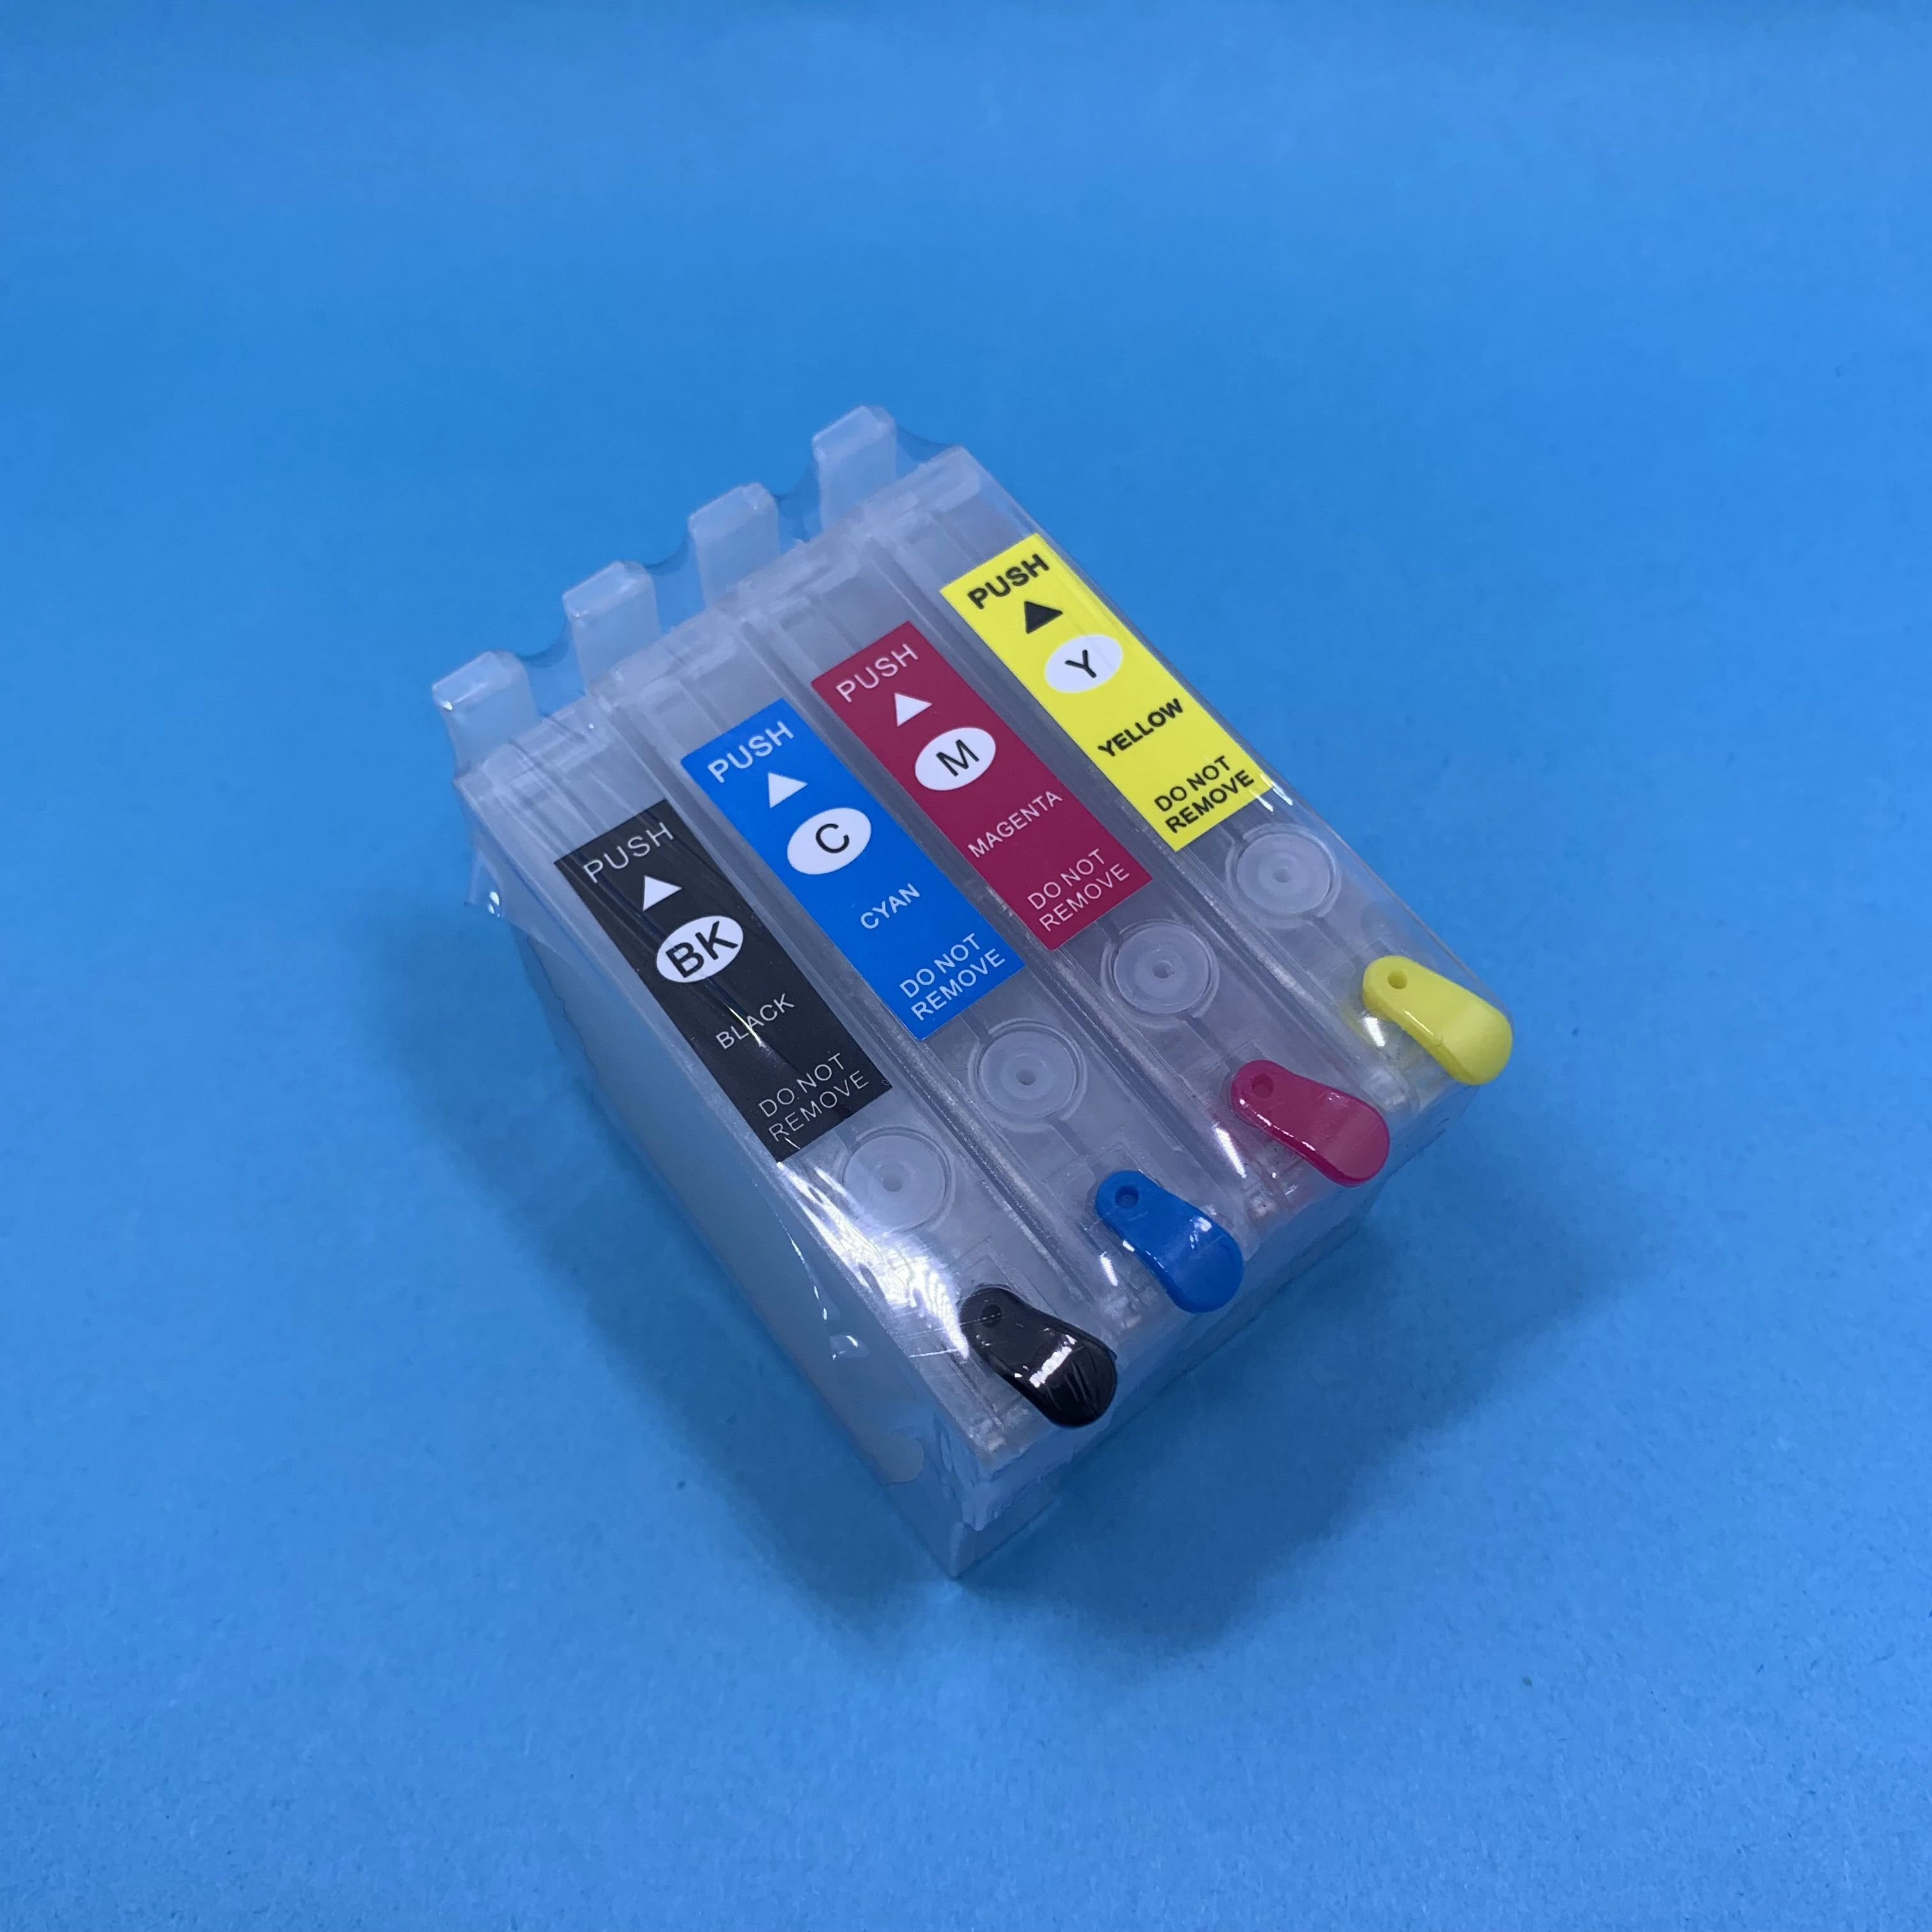 YOTAT Empty Refillable Ink Cartridge T1411 T1412 T1413 T1414 for Epson WorkForce WF-3521 / Office 535 ME Office 570W 85ND 82WD